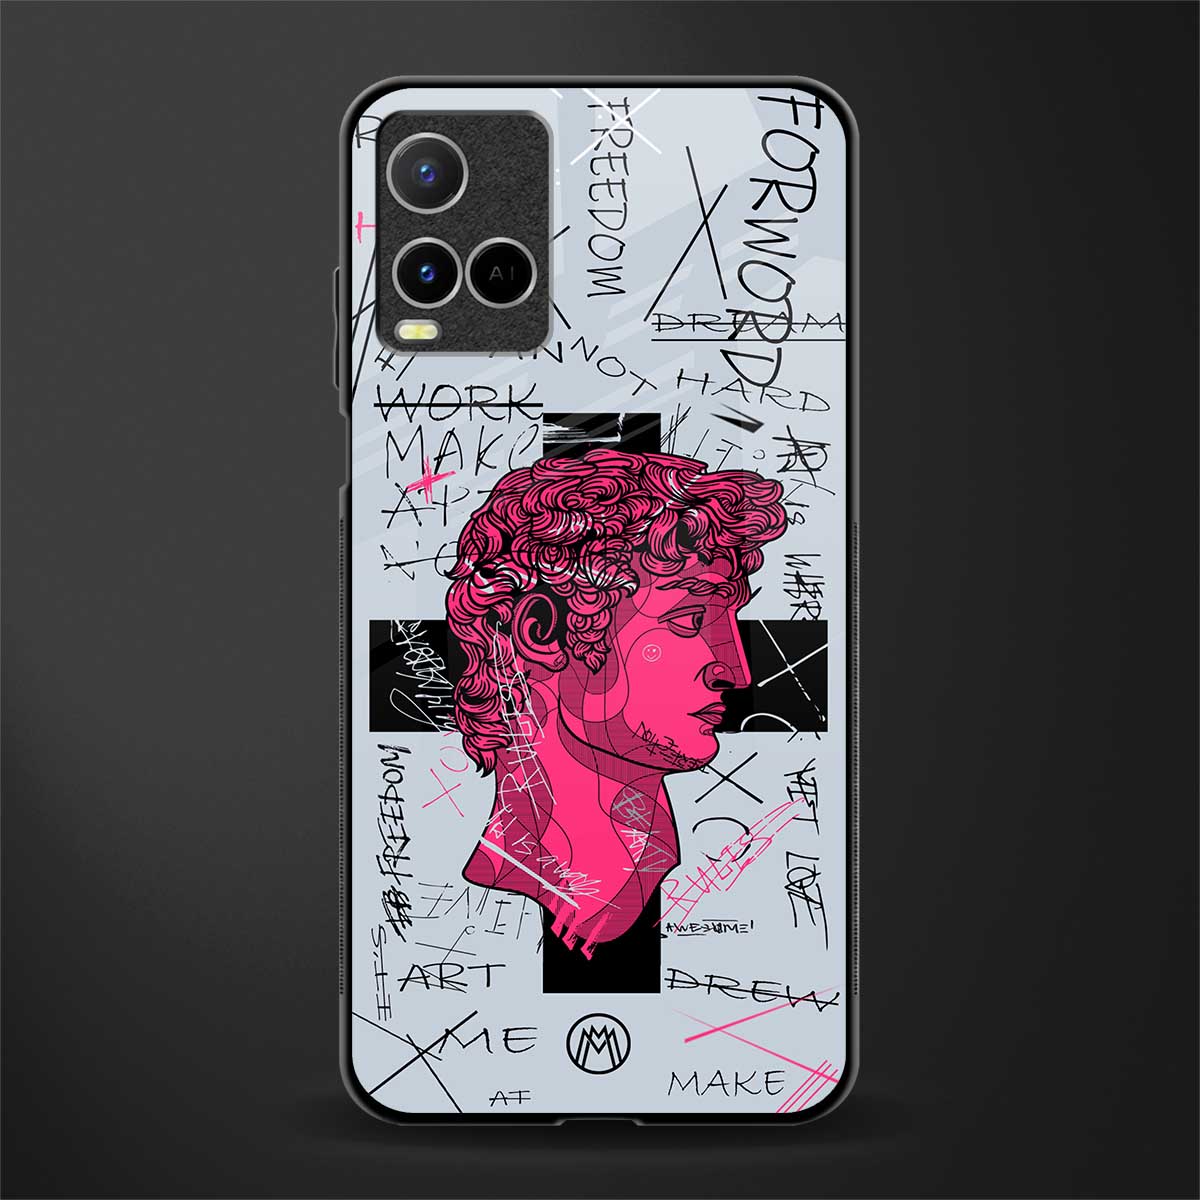 lost in reality david glass case for vivo y21 image